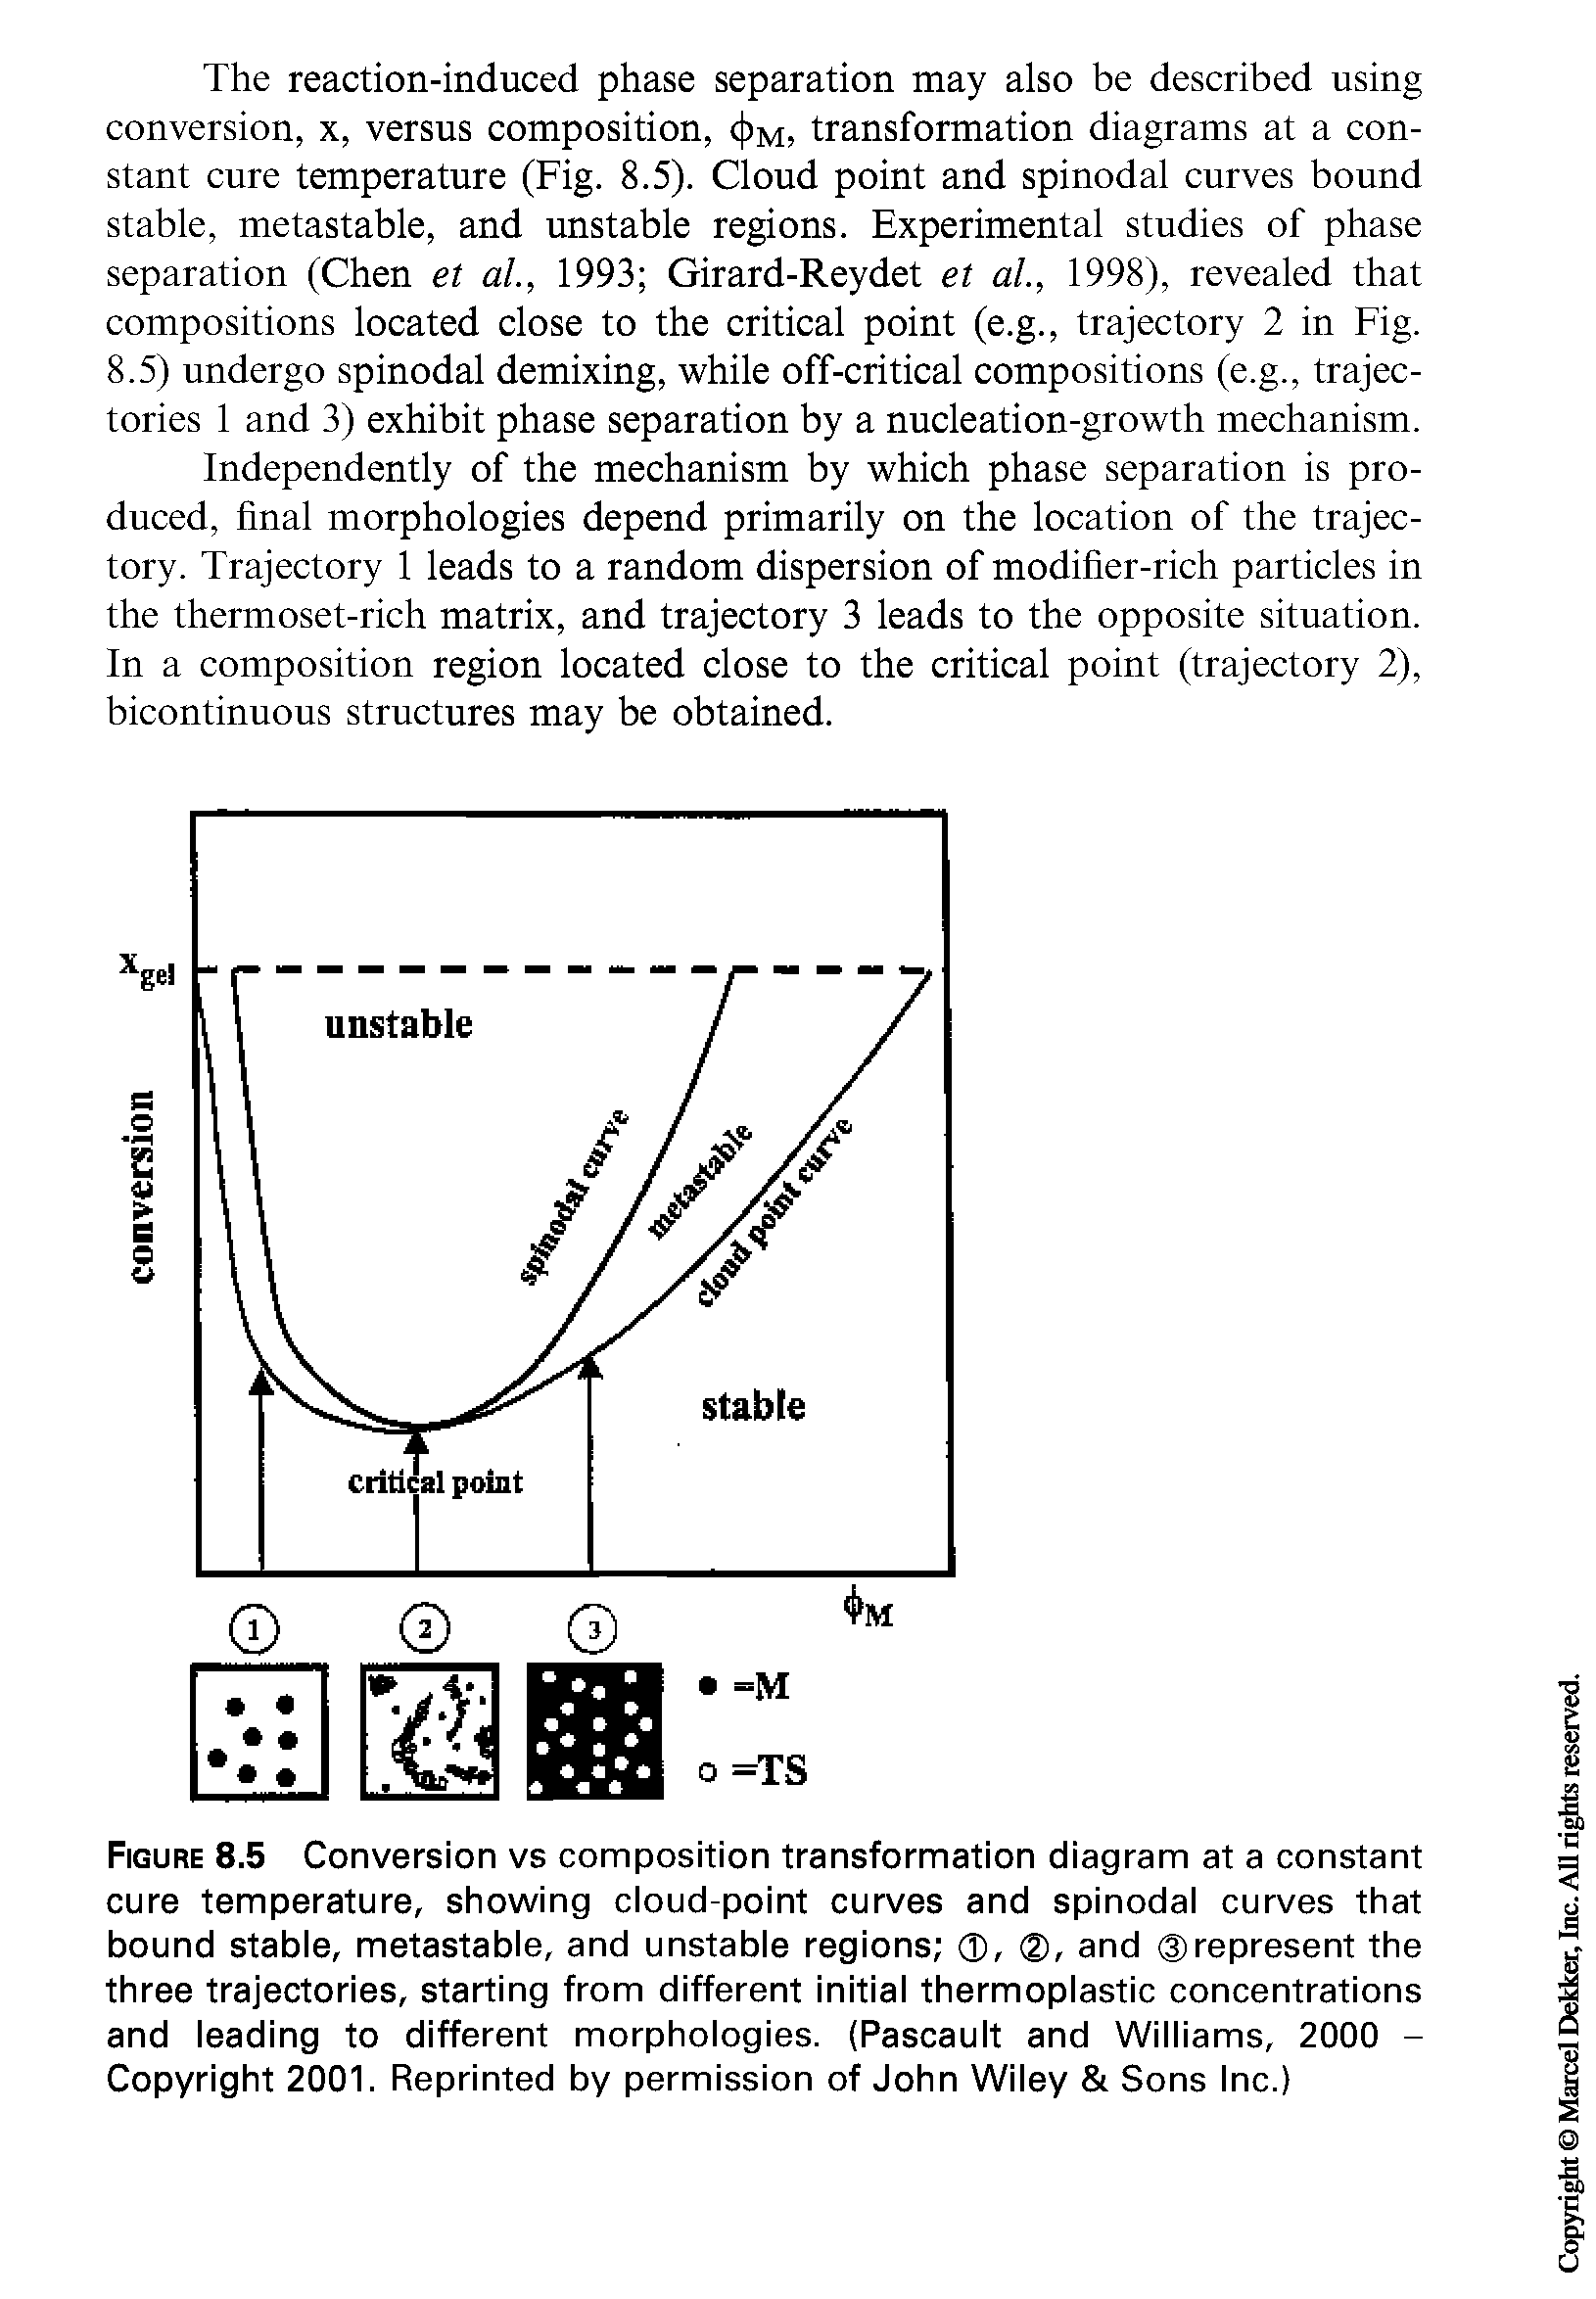 Figure 8.5 Conversion vs composition transformation diagram at a constant cure temperature, showing cloud-point curves and spinodal curves that bound stable, metastable, and unstable regions , , and represent the three trajectories, starting from different initial thermoplastic concentrations and leading to different morphologies. (Pascault and Williams, 2000 -Copyright 2001. Reprinted by permission of John Wiley Sons Inc.)...